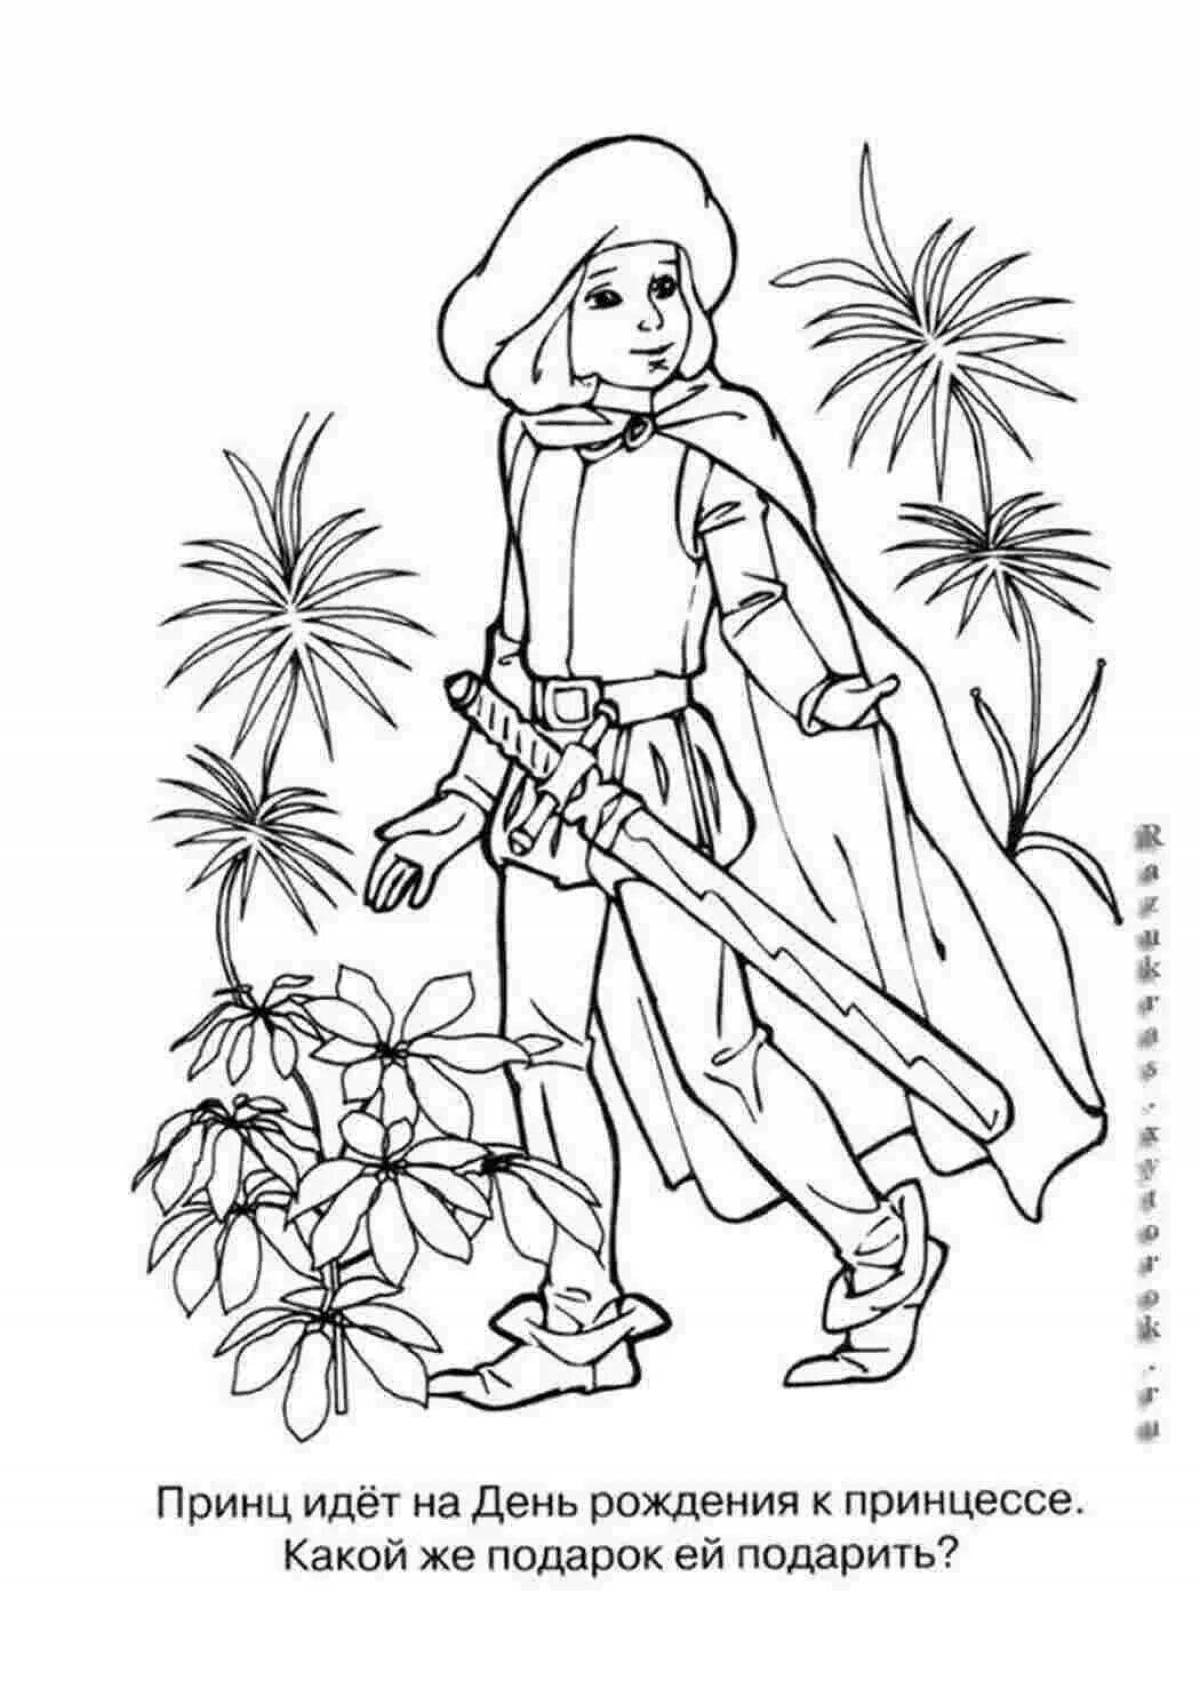 Children's prince coloring book